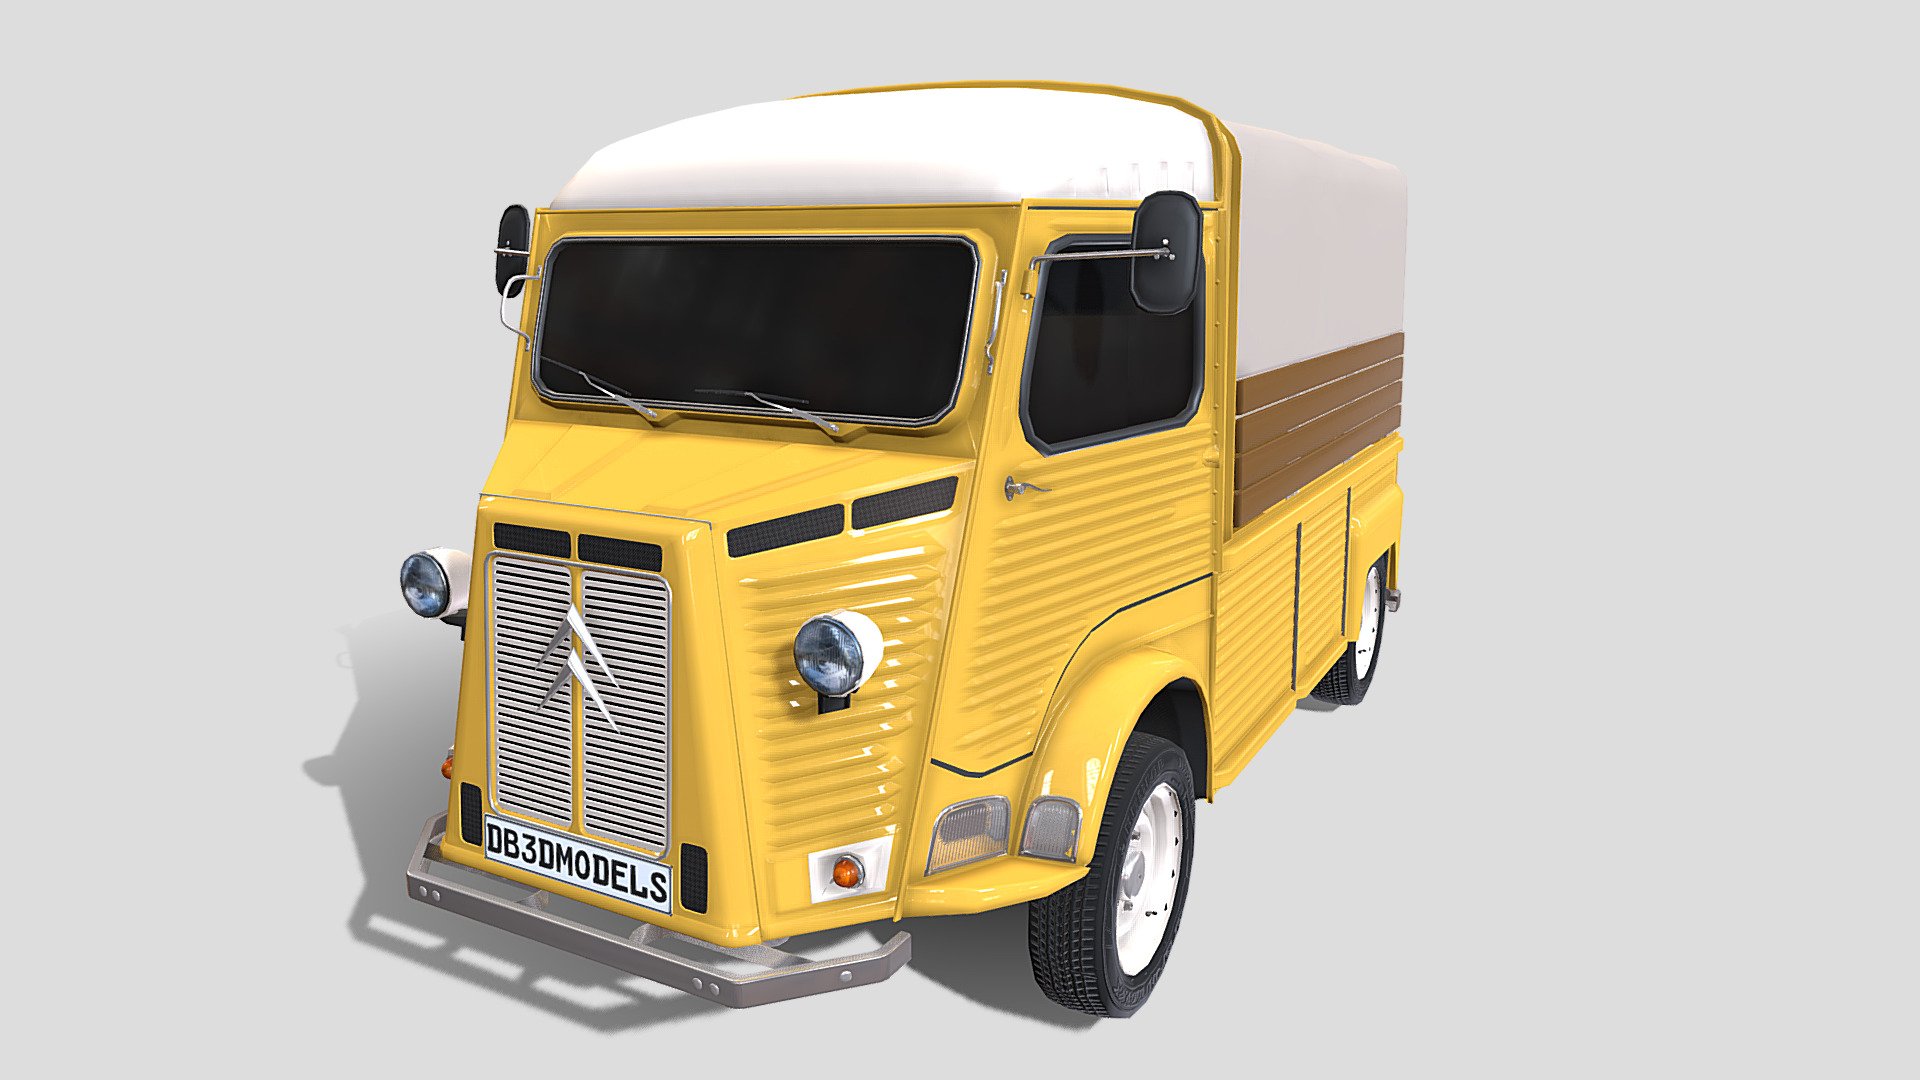 Highly detailed Citroen HY 3D model rendered with Cycles in Blender, as per seen on attached images.

The model is very intricately built, with a simple underbody built as well. 

The 3d model is scaled to original size in Blender.

File formats:

-.blend, rendered with cycles, as seen in the images;

-.obj, with materials applied;

-.dae, with materials applied;

-.fbx, with materials applied;

-.stl;

Files come named appropriately and split by file format.

3D Software:

The 3D model was originally created in Blender 3.1 and rendered with Cycles.

Materials and textures:

The models have materials applied in all formats, and are ready to import and render, note that some minimal adjustments might be needed to look best in the renderer of choice.

The models come with png textures.

Preview scenes: - Citroen HY Pick Up v1 - Buy Royalty Free 3D model by dragosburian 3d model